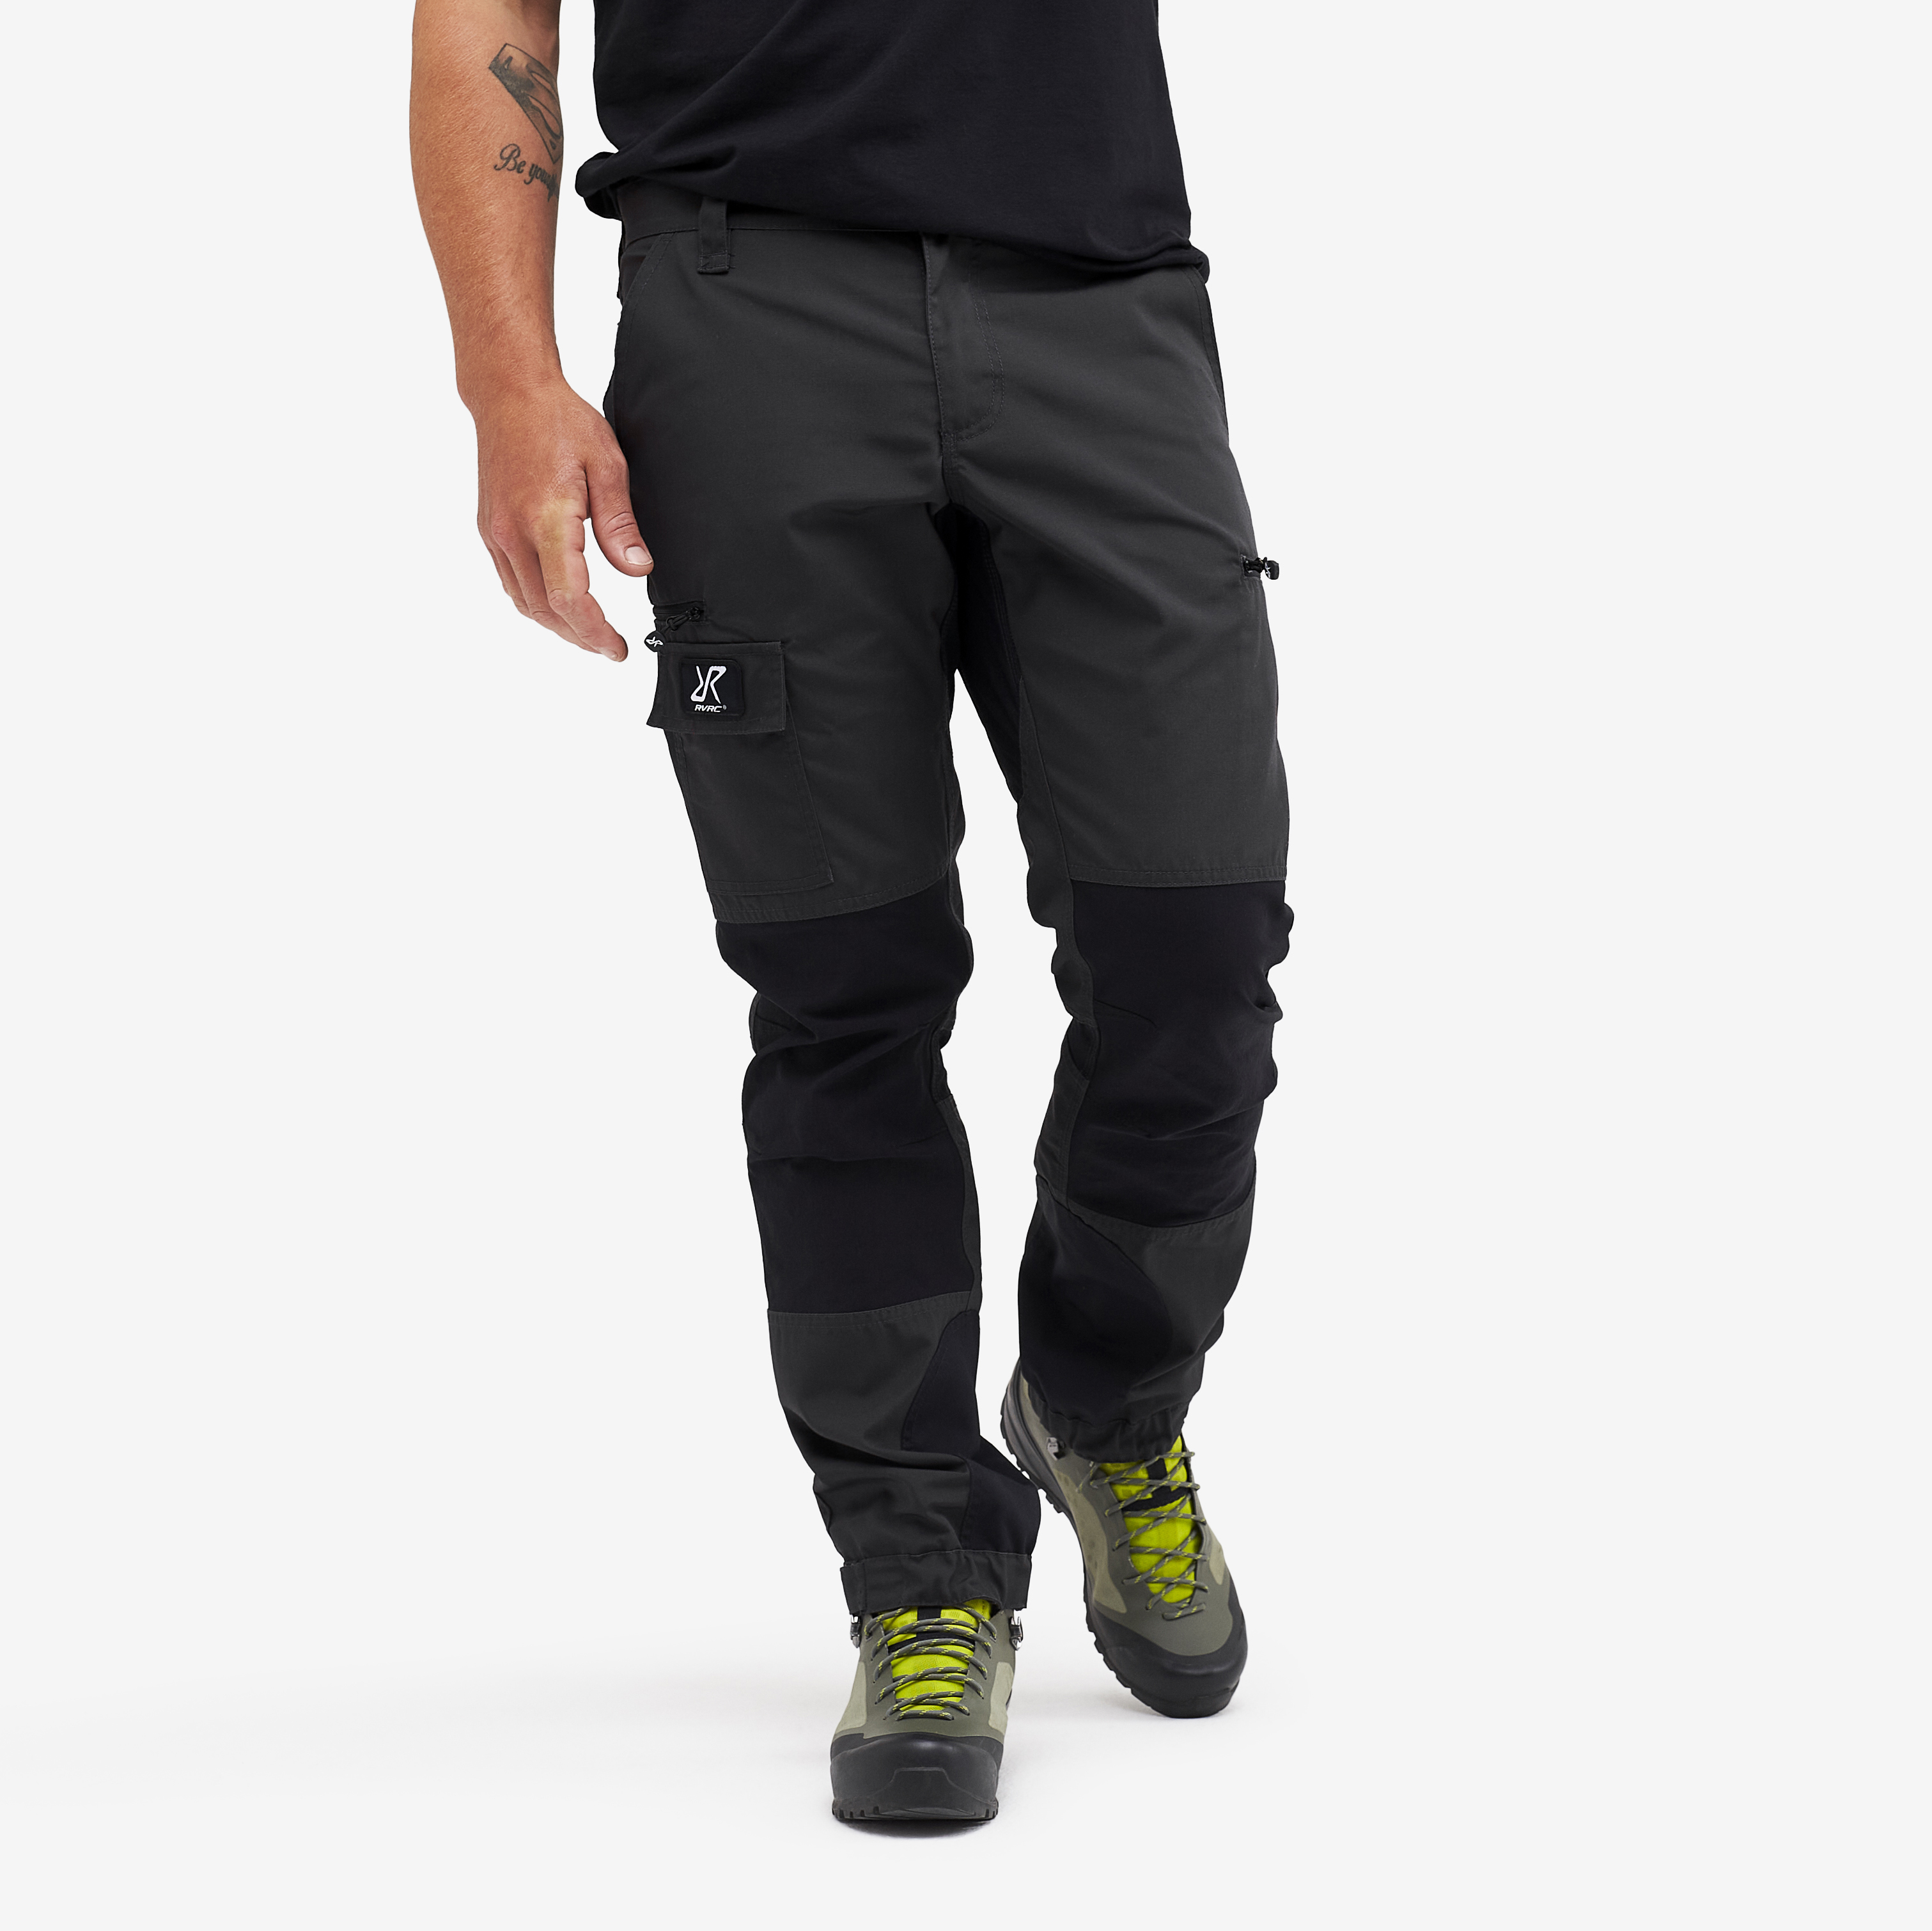 Nordwand Short Pants Anthracite